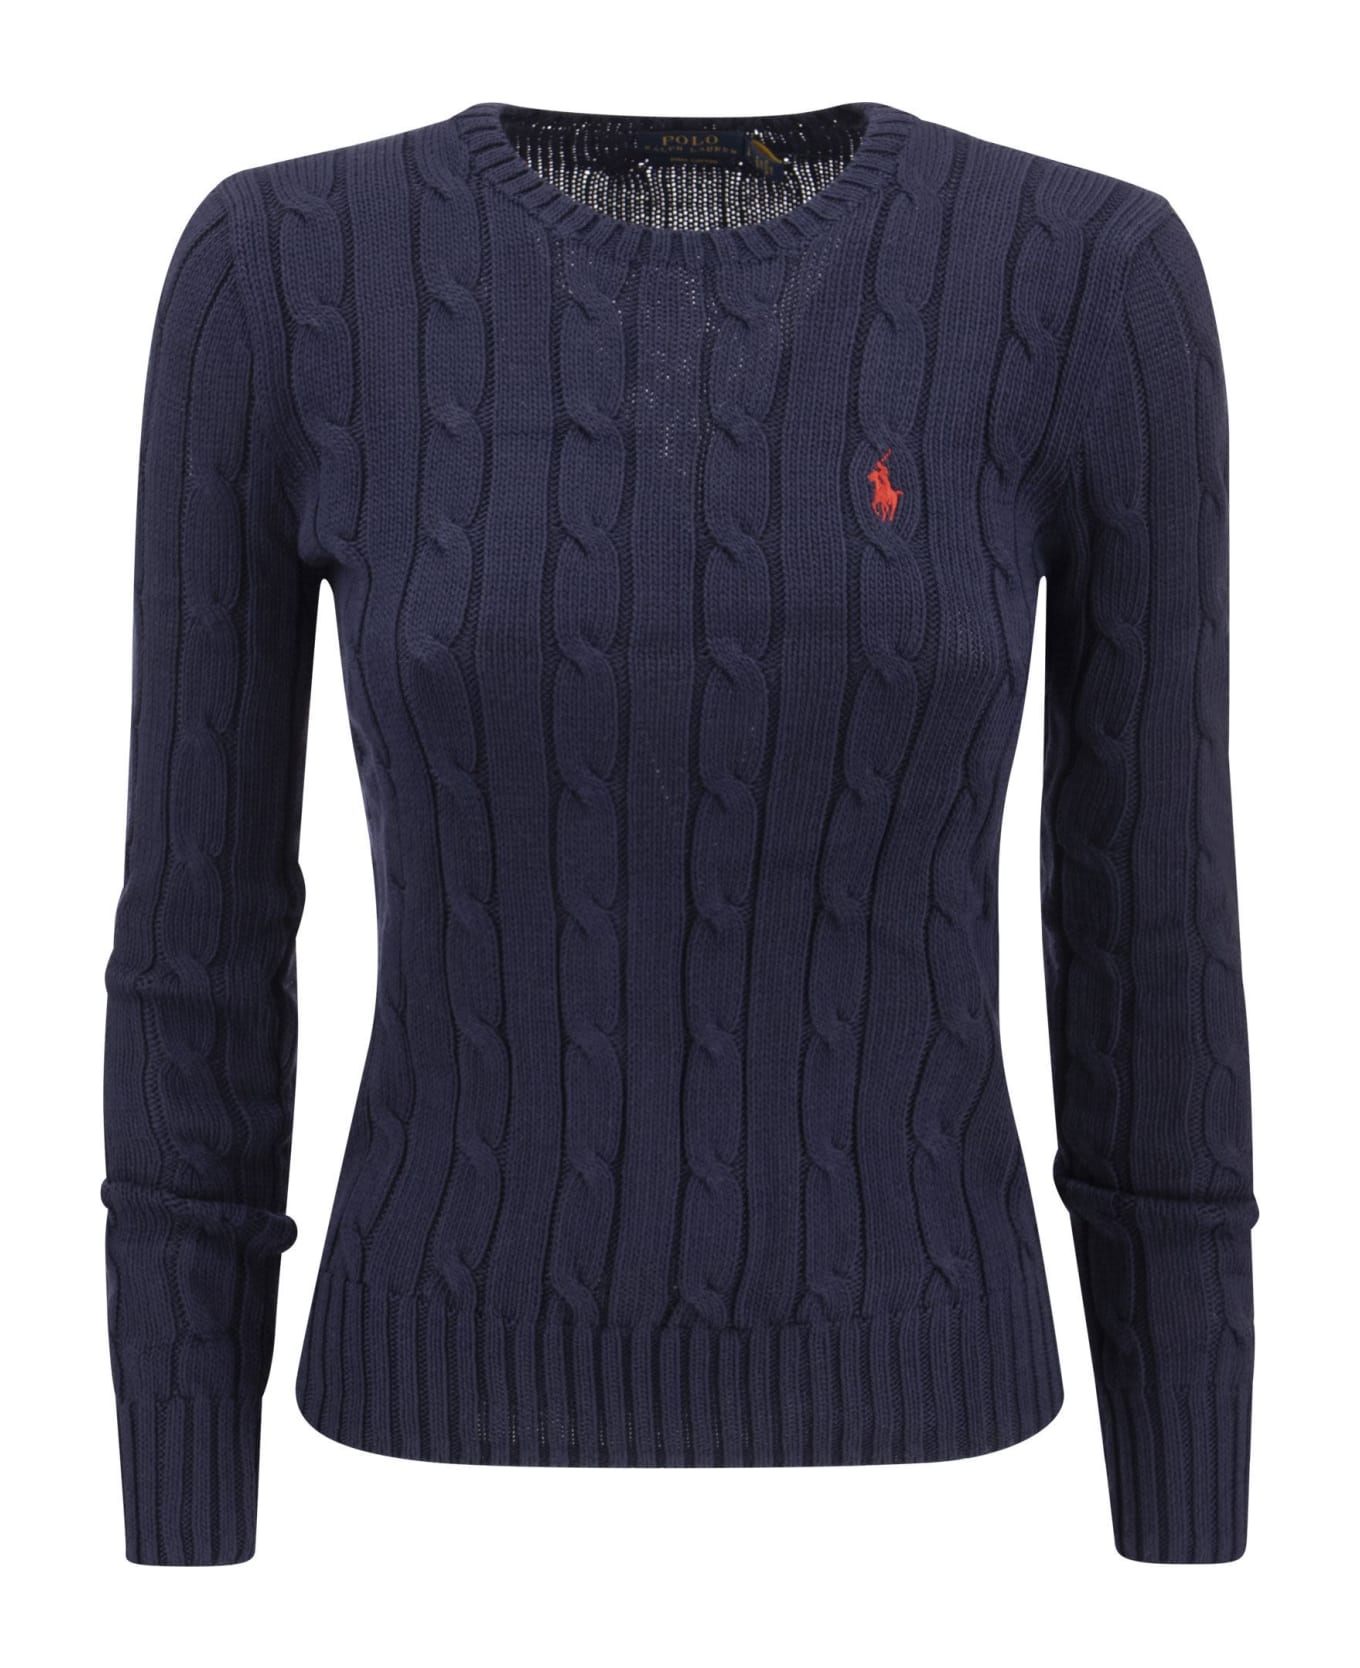 Polo Ralph Lauren Cable Knit Pullover With Contrasting Embroidered Logo - Navy Blue ニットウェア